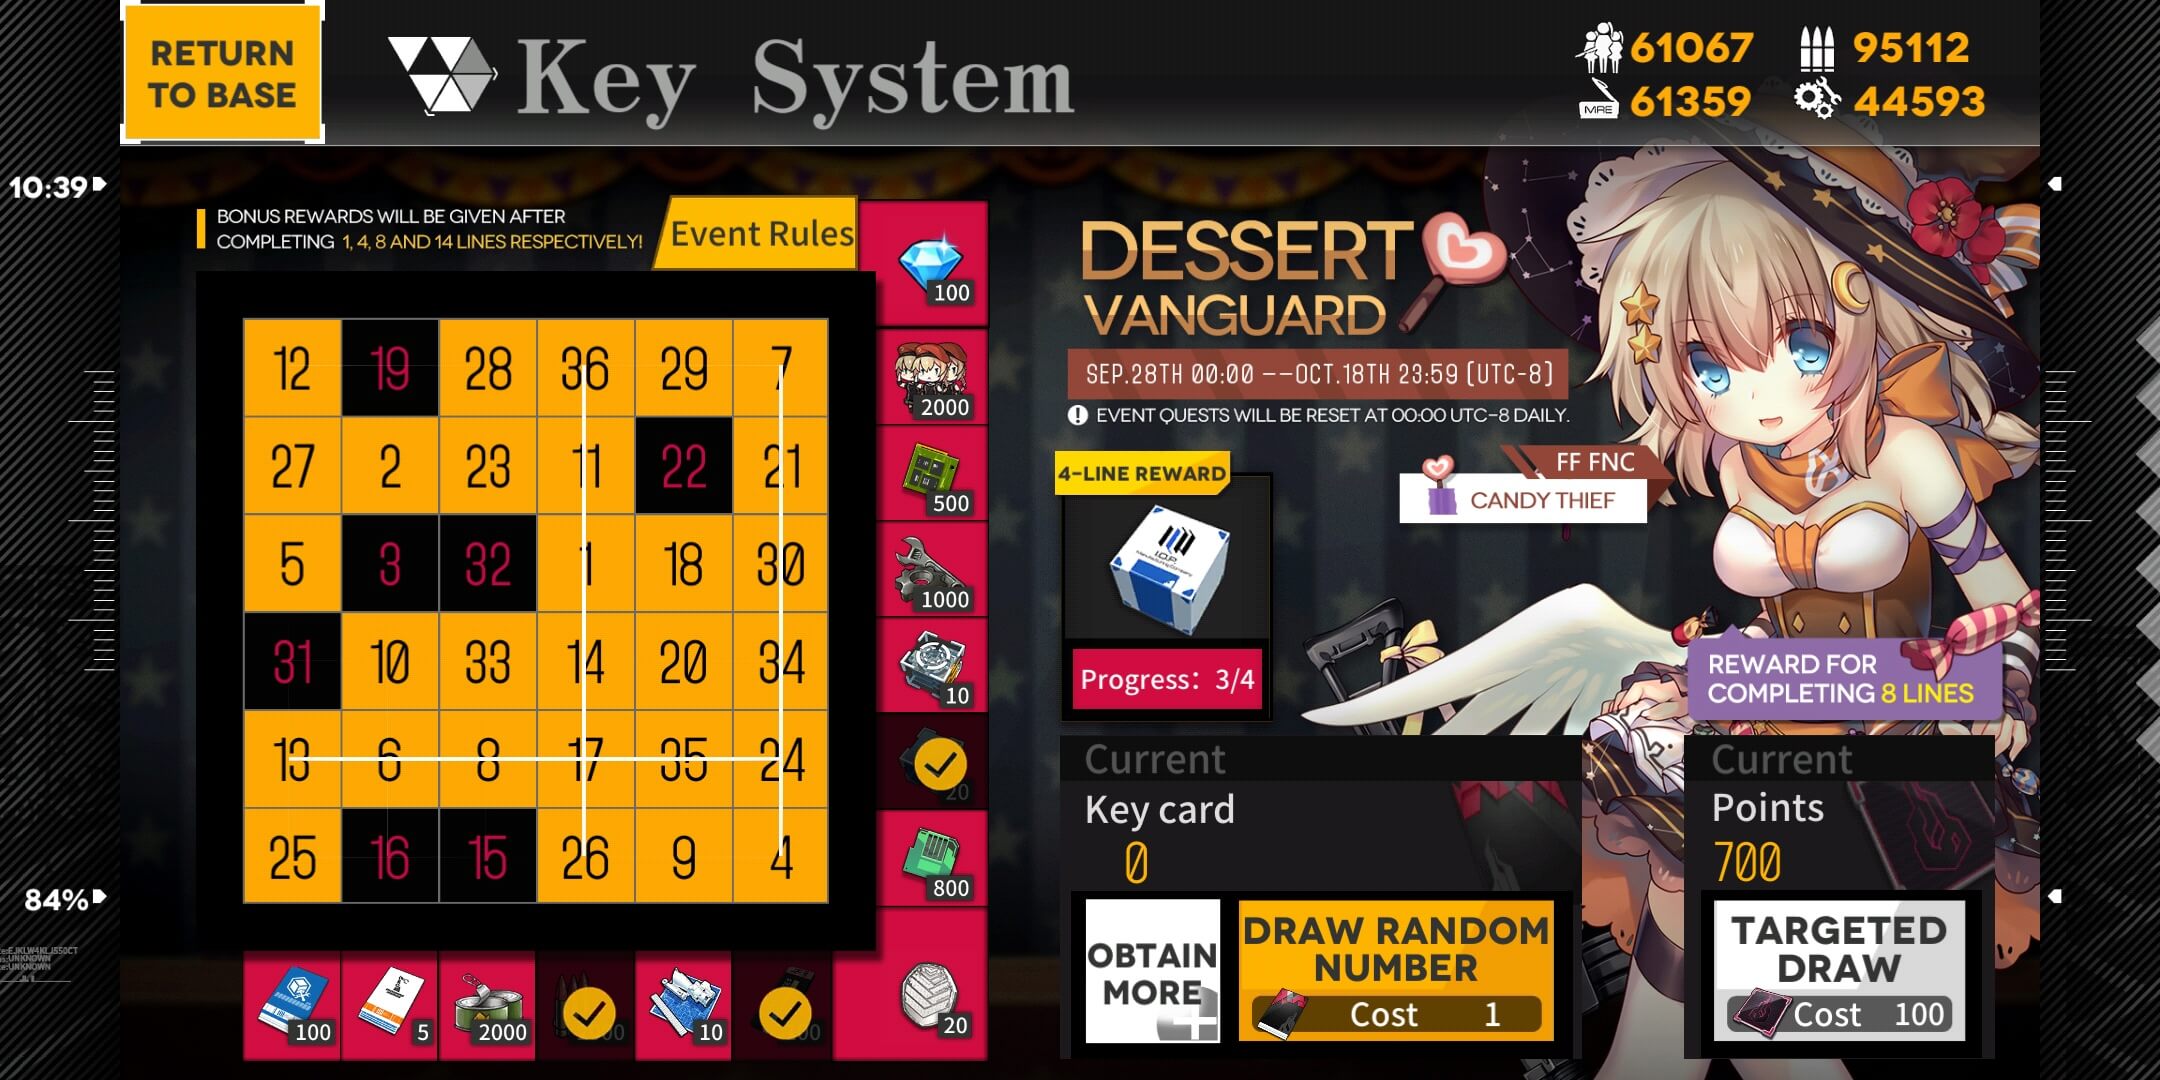 Girls' Frontline FNC Bingo (Key Card) Board with 7 open slots and 700 points, allowing for full completion by using the targeted draws. 